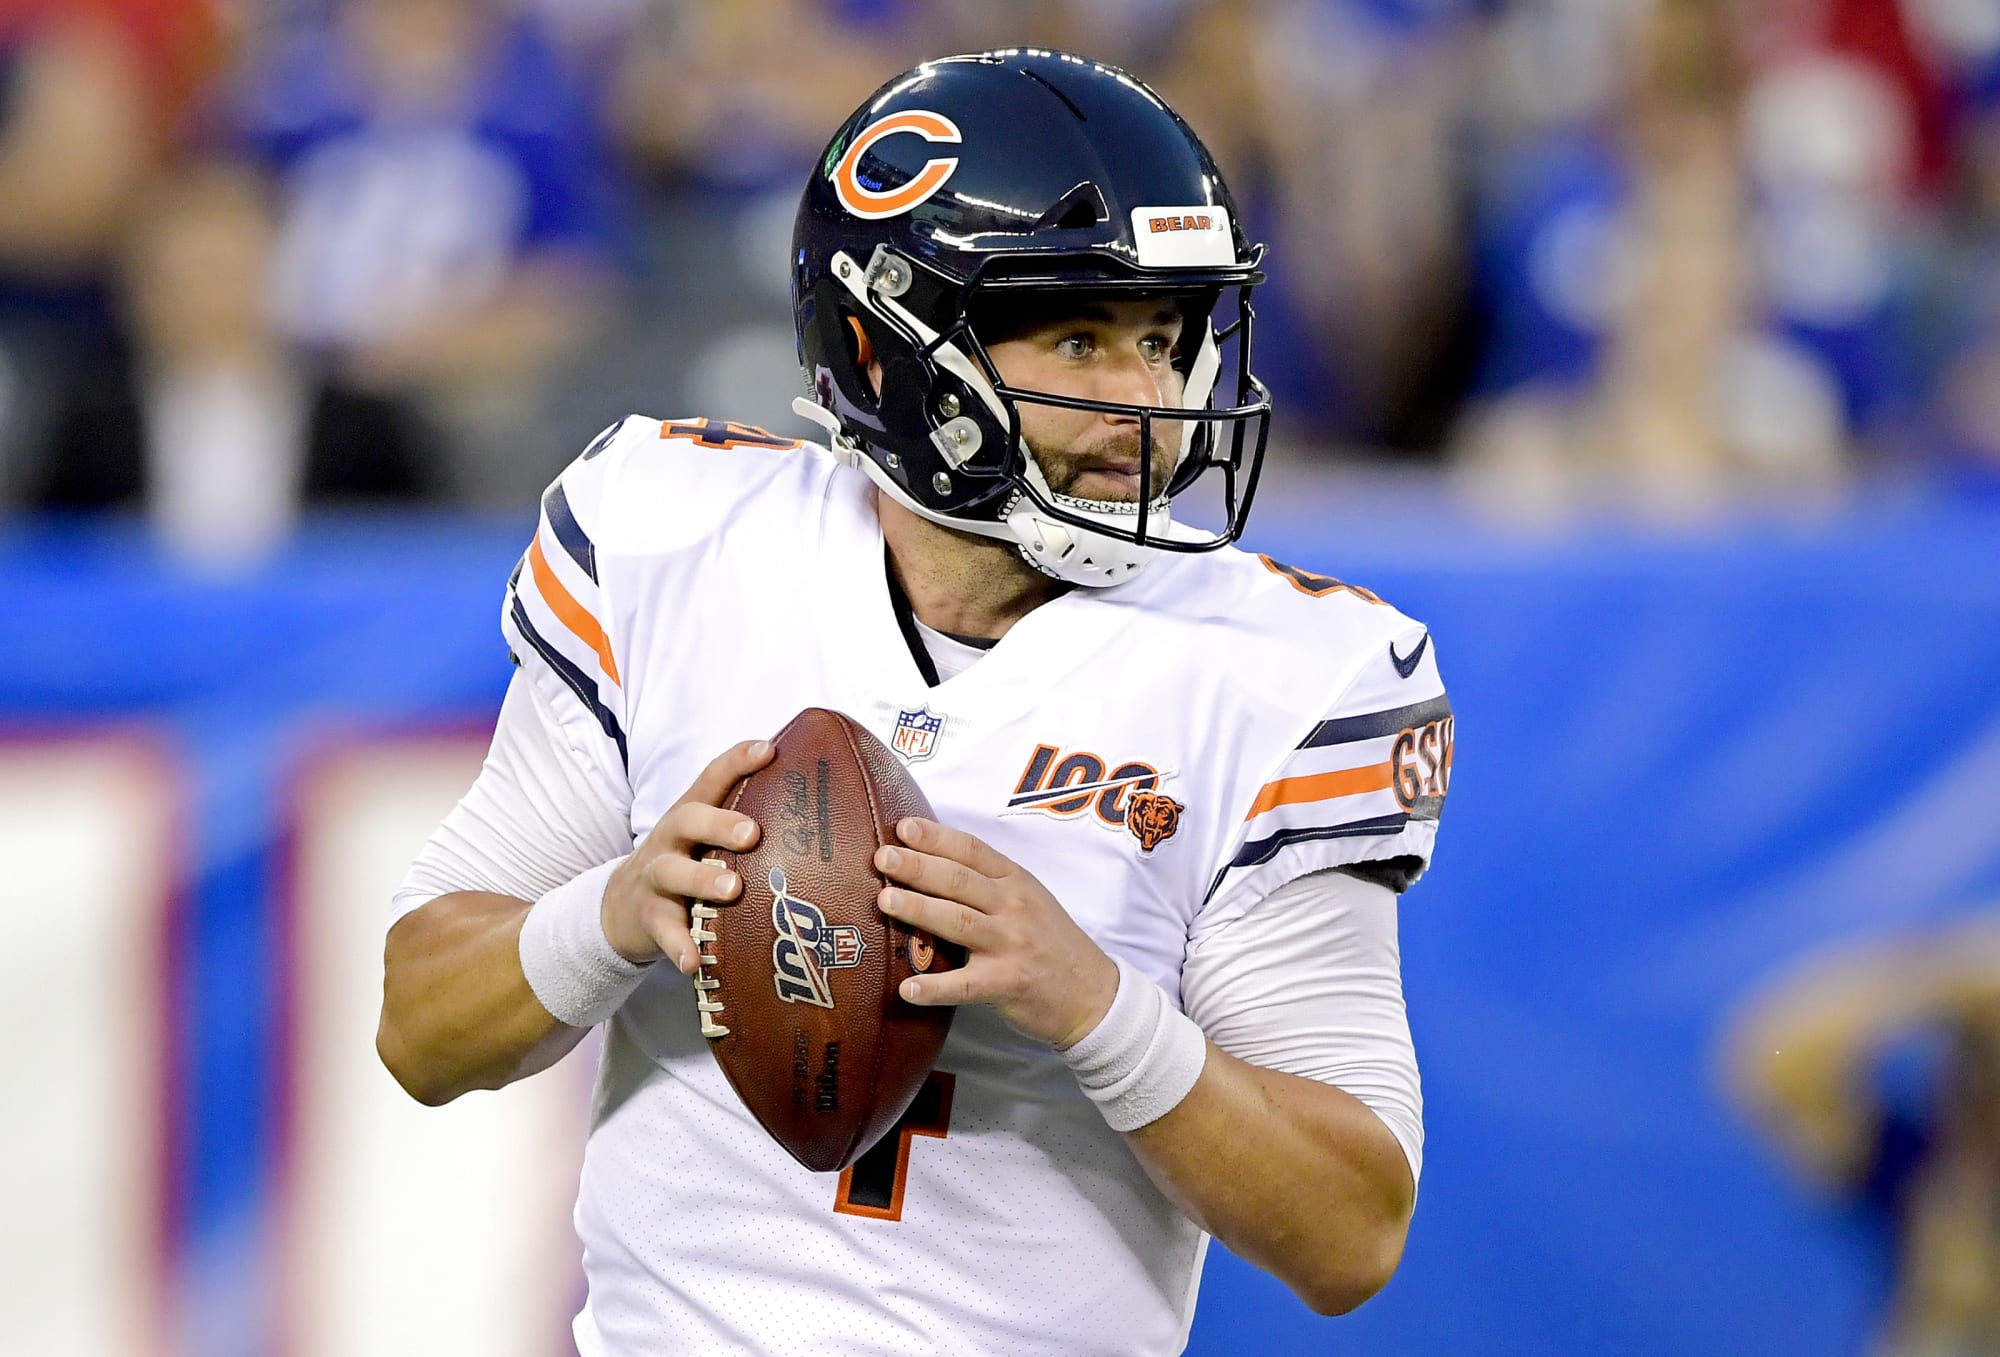 Chicago Bears Team needs to invest in a backup quarterback